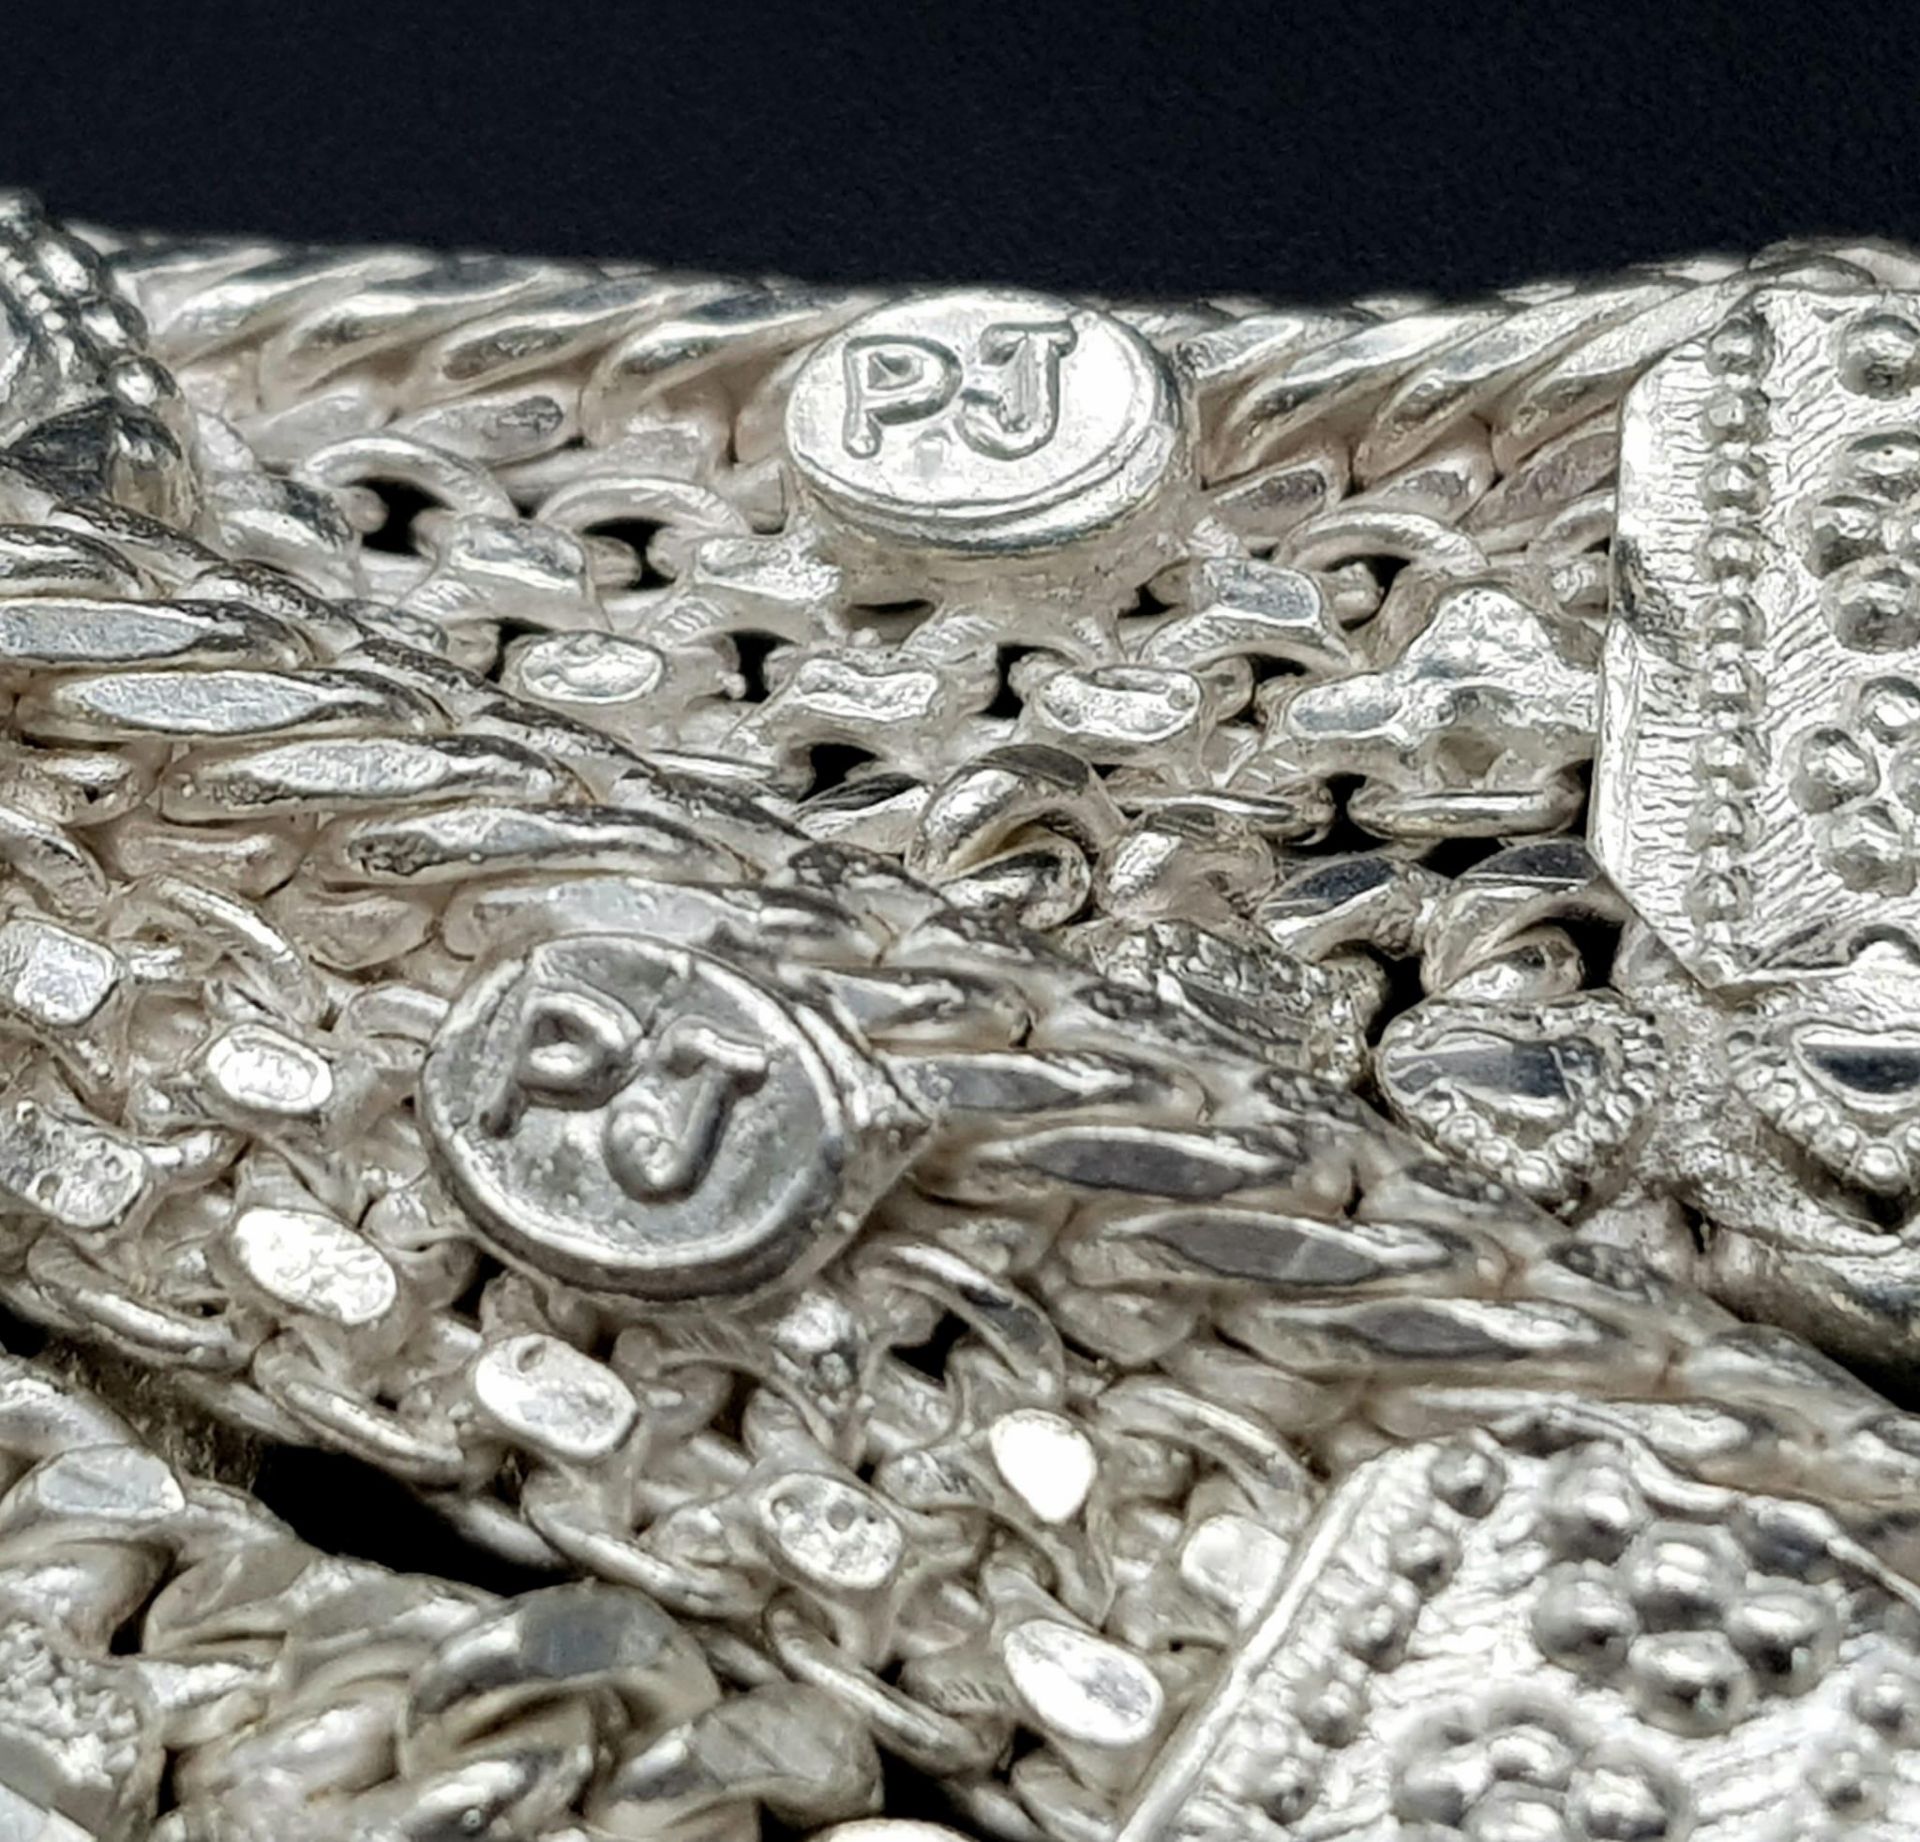 A Vintage Indian Silver (800) Jewellery Collection. Includes 4 upper arm decorative bands and one - Image 8 of 9